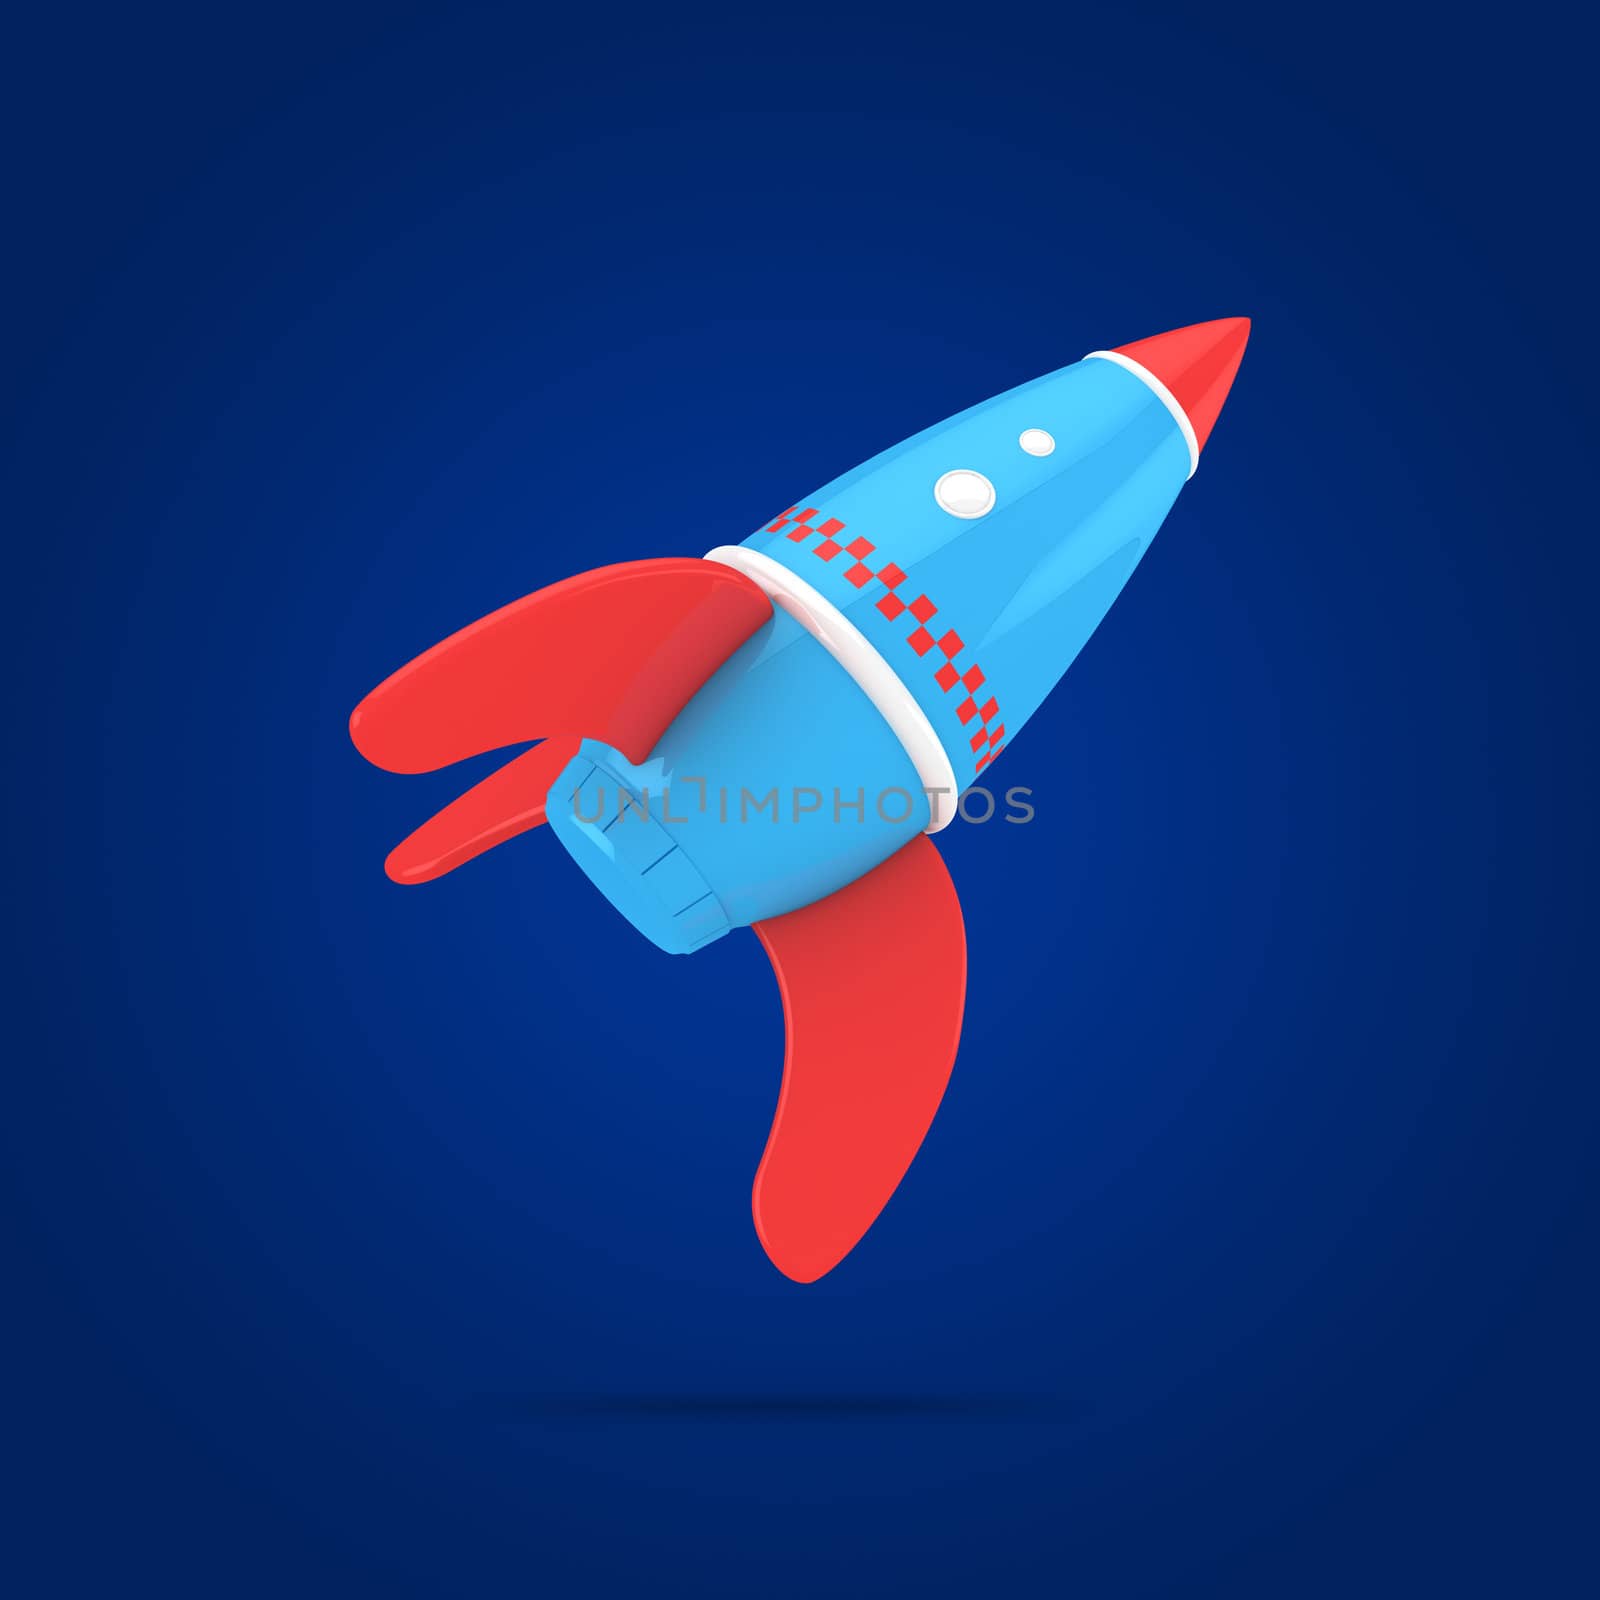 Flying rocket on the blue background, 3d computer graphic